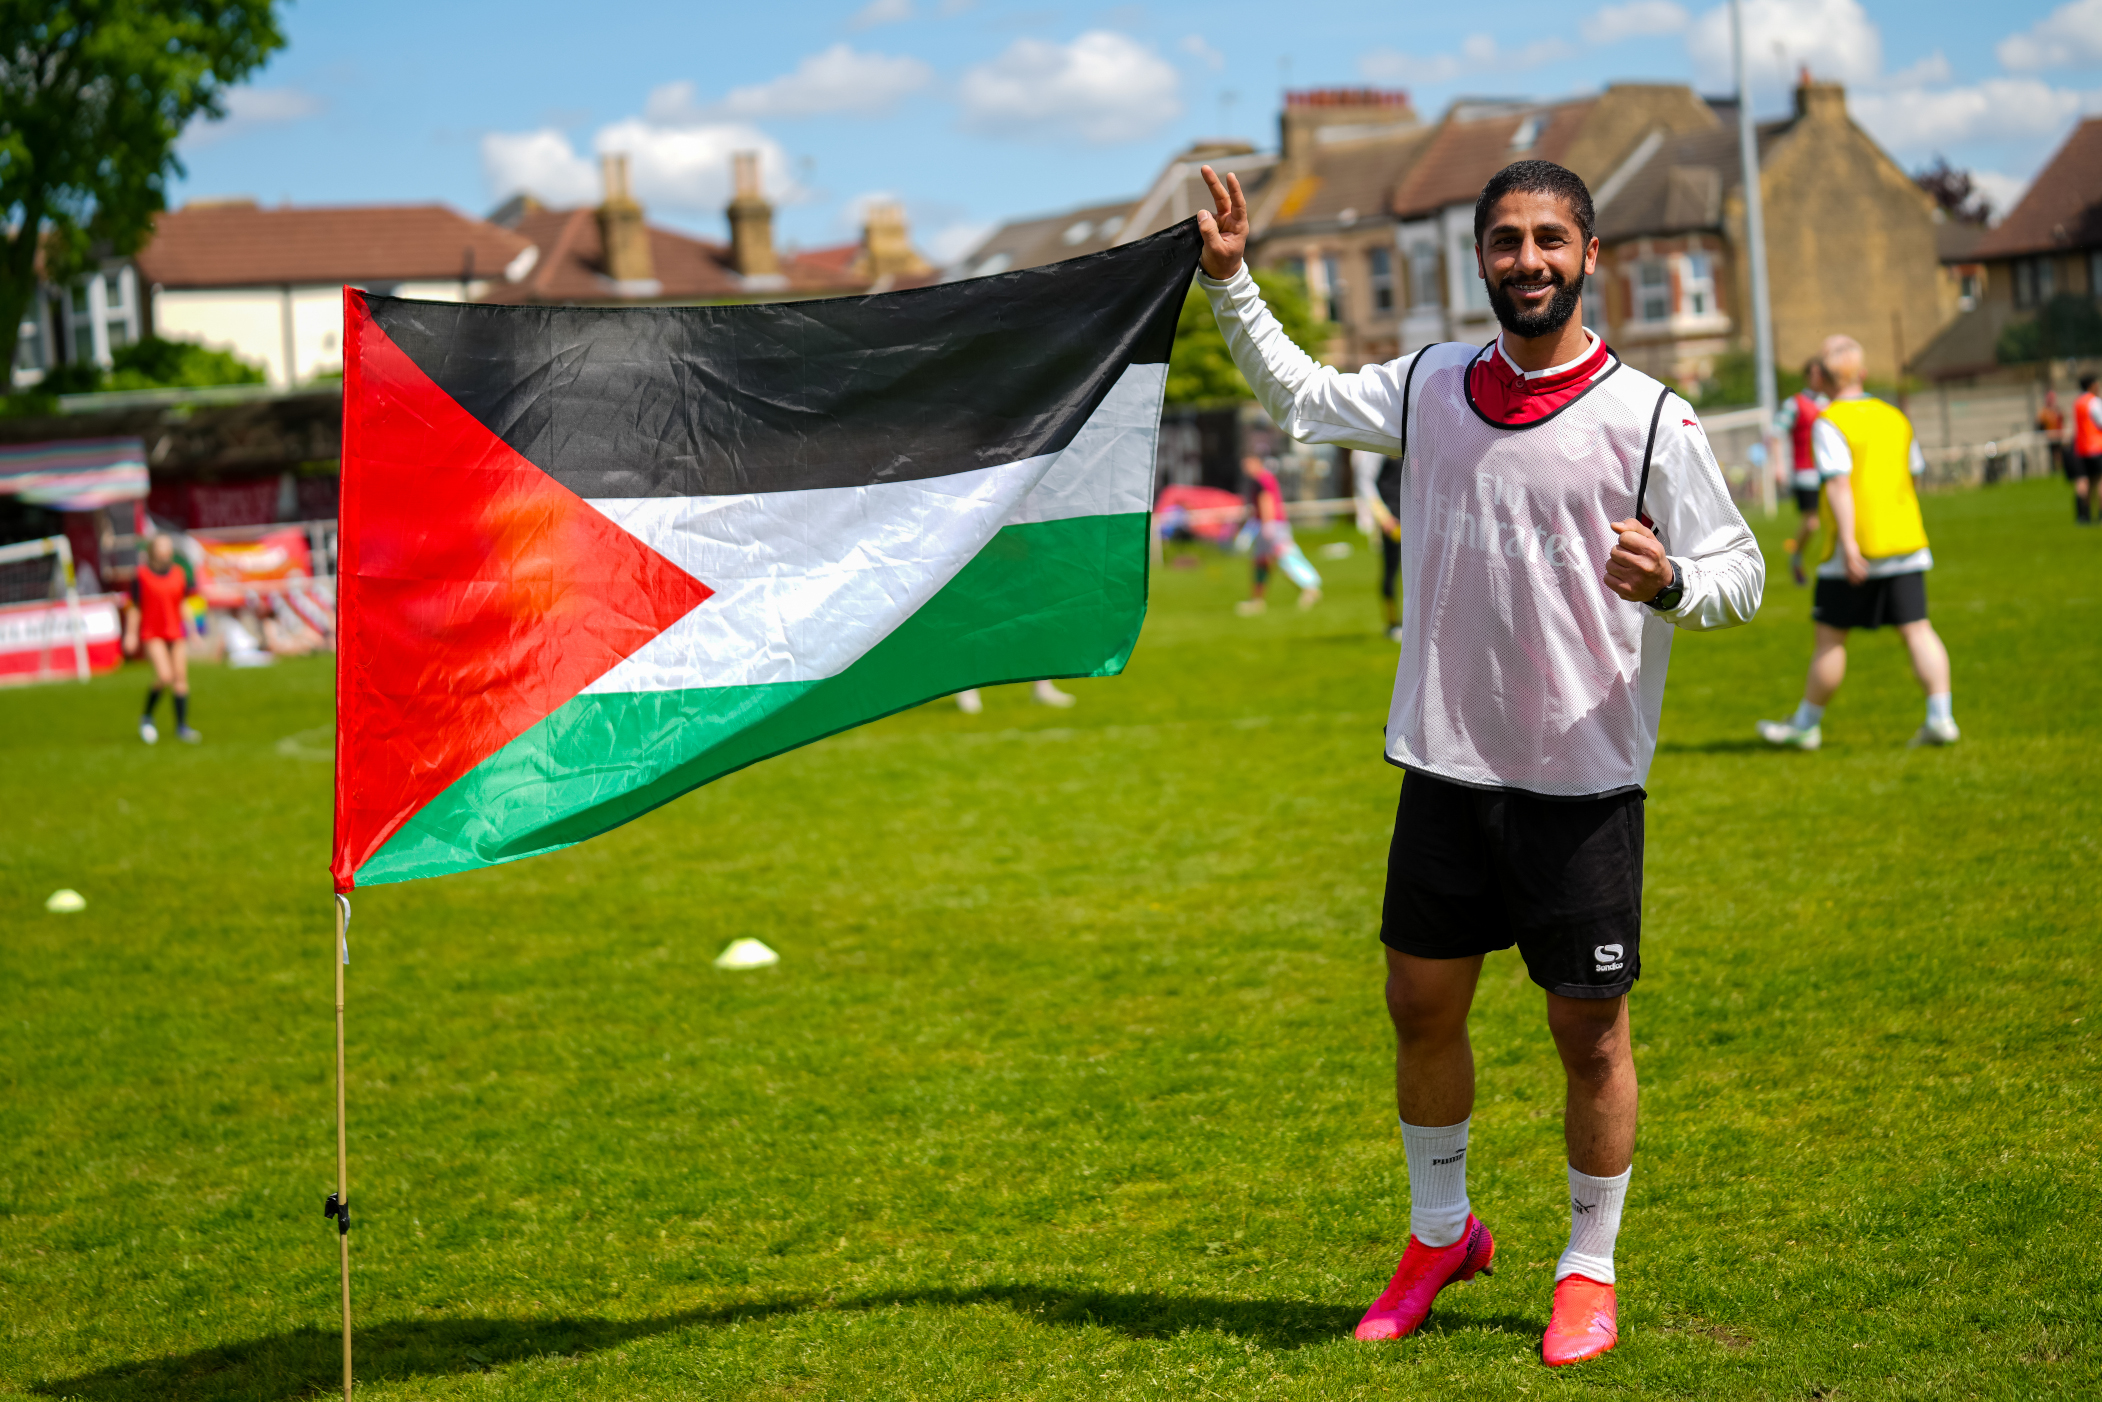 Clapton Community Football Club and Football For Palestine organised a tournament